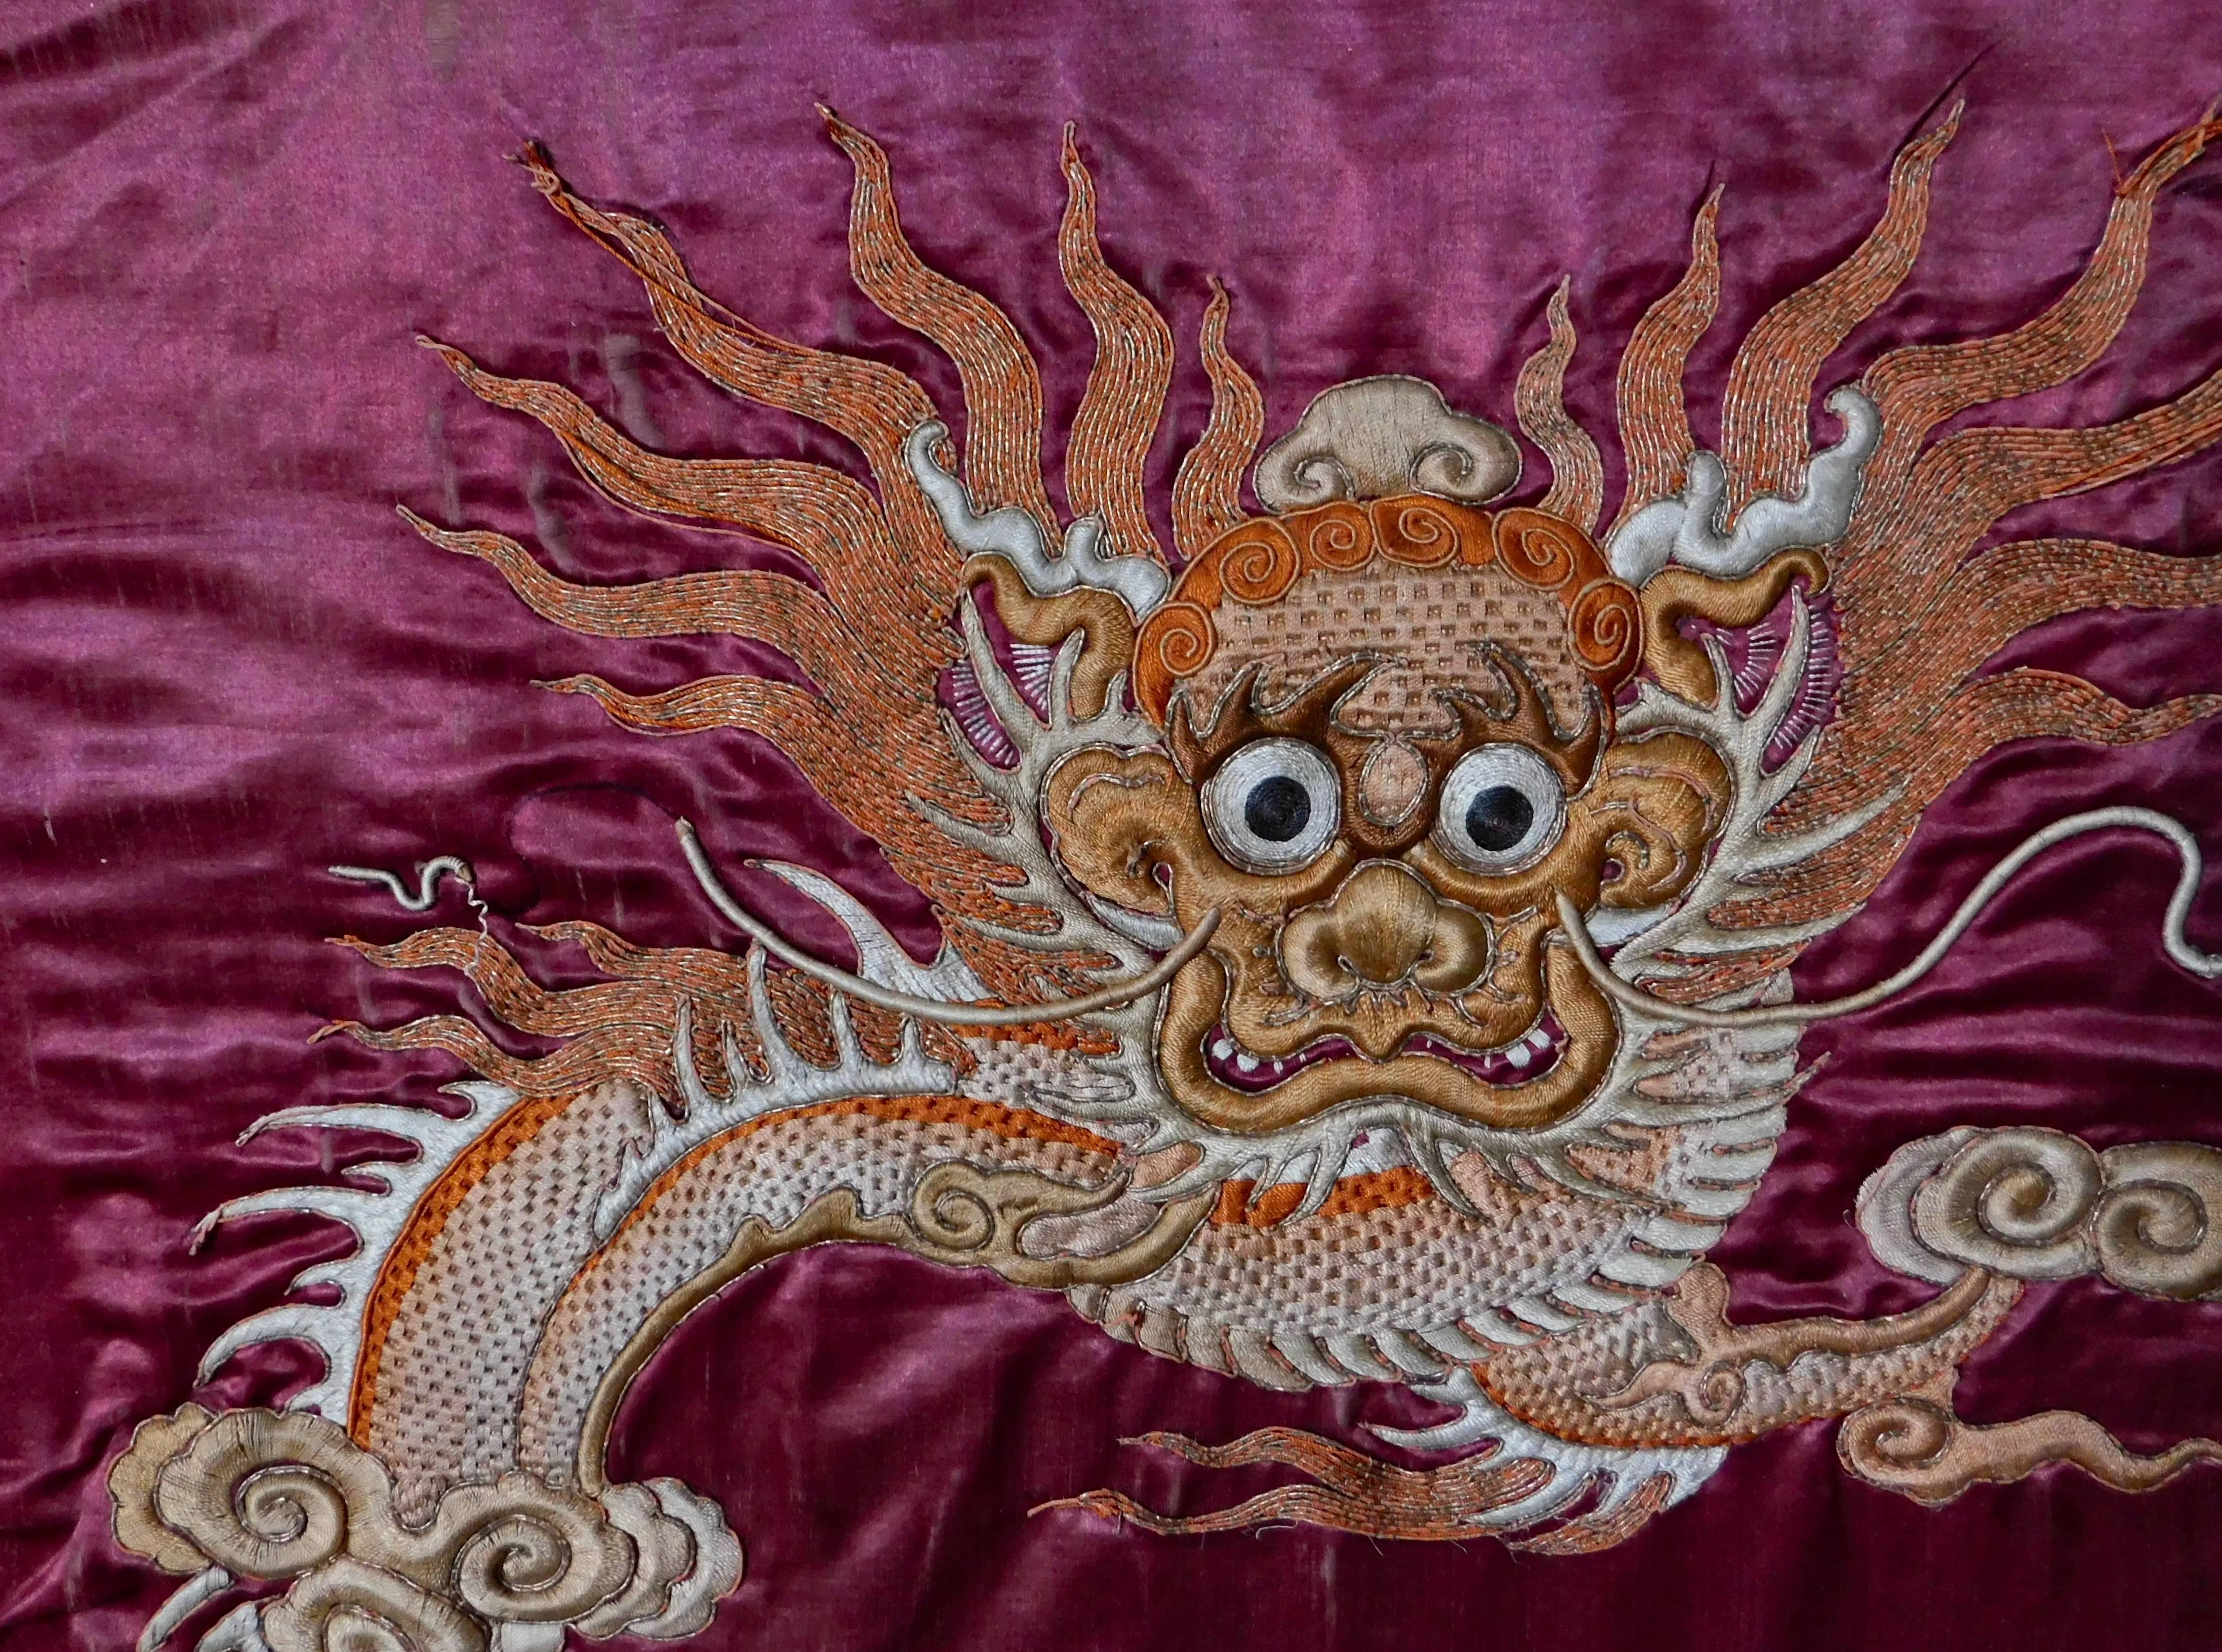 This stunning pair of Chinese silk panels are hand embroidered using the filled couching technique with silk and gold wrapped threads.
Especially beautiful are the stitches used to construct the dragon bodies which form a basket weave indented